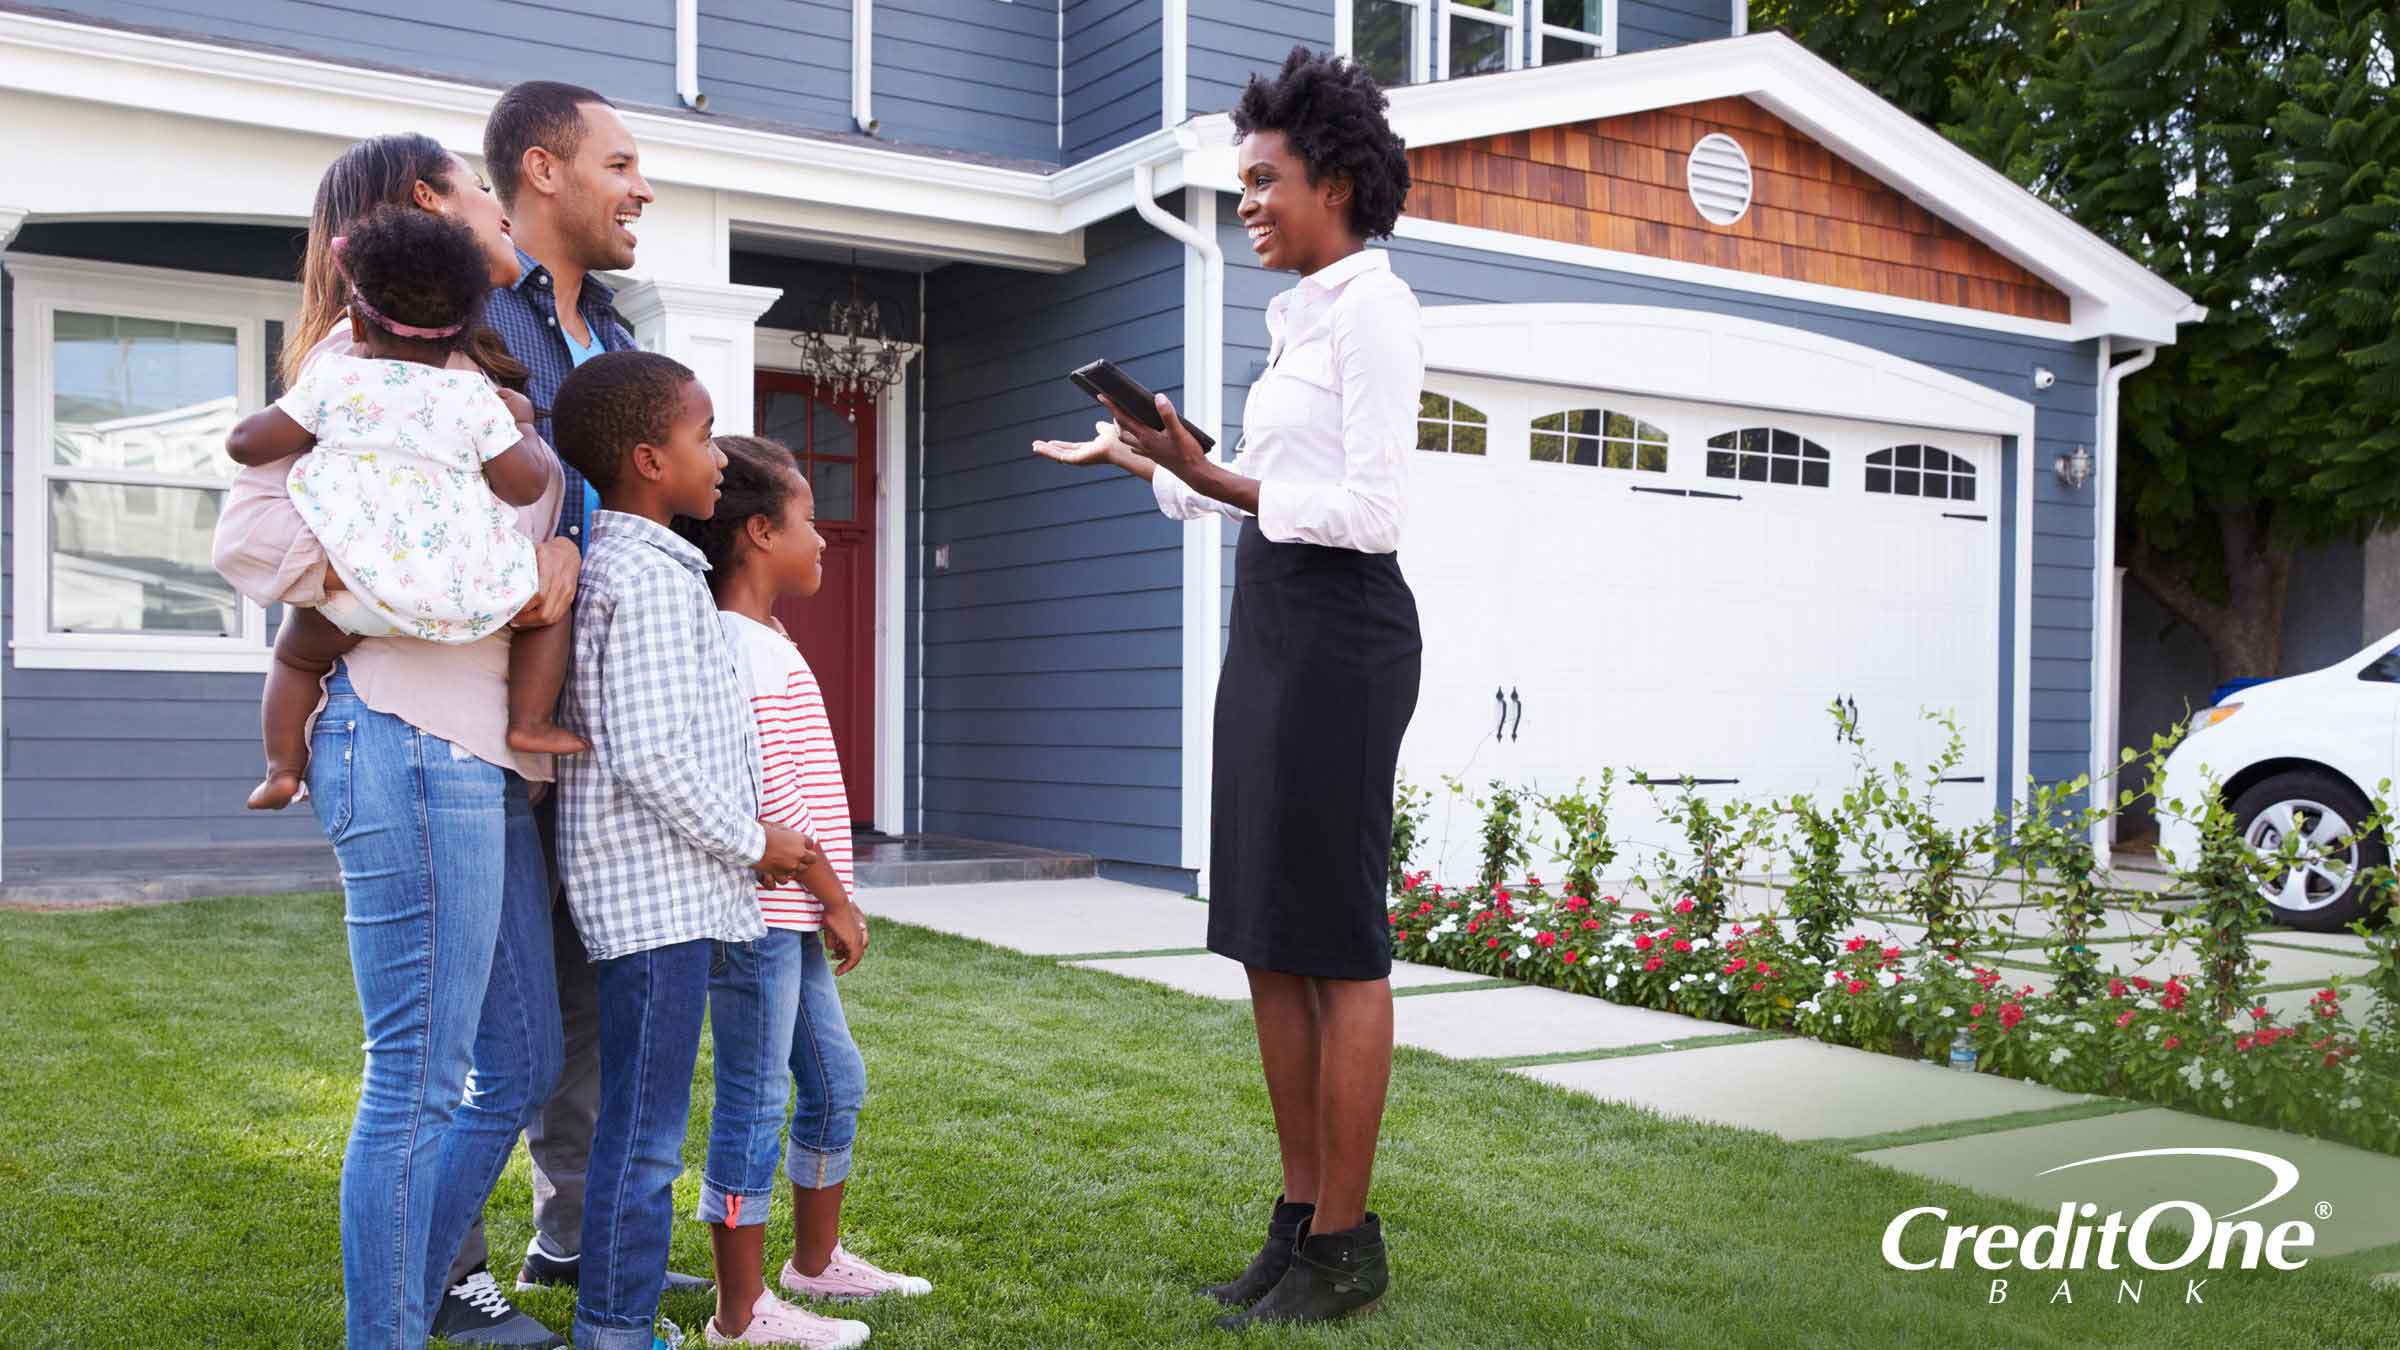 A good credit score puts a family in a good position to purchase a new home